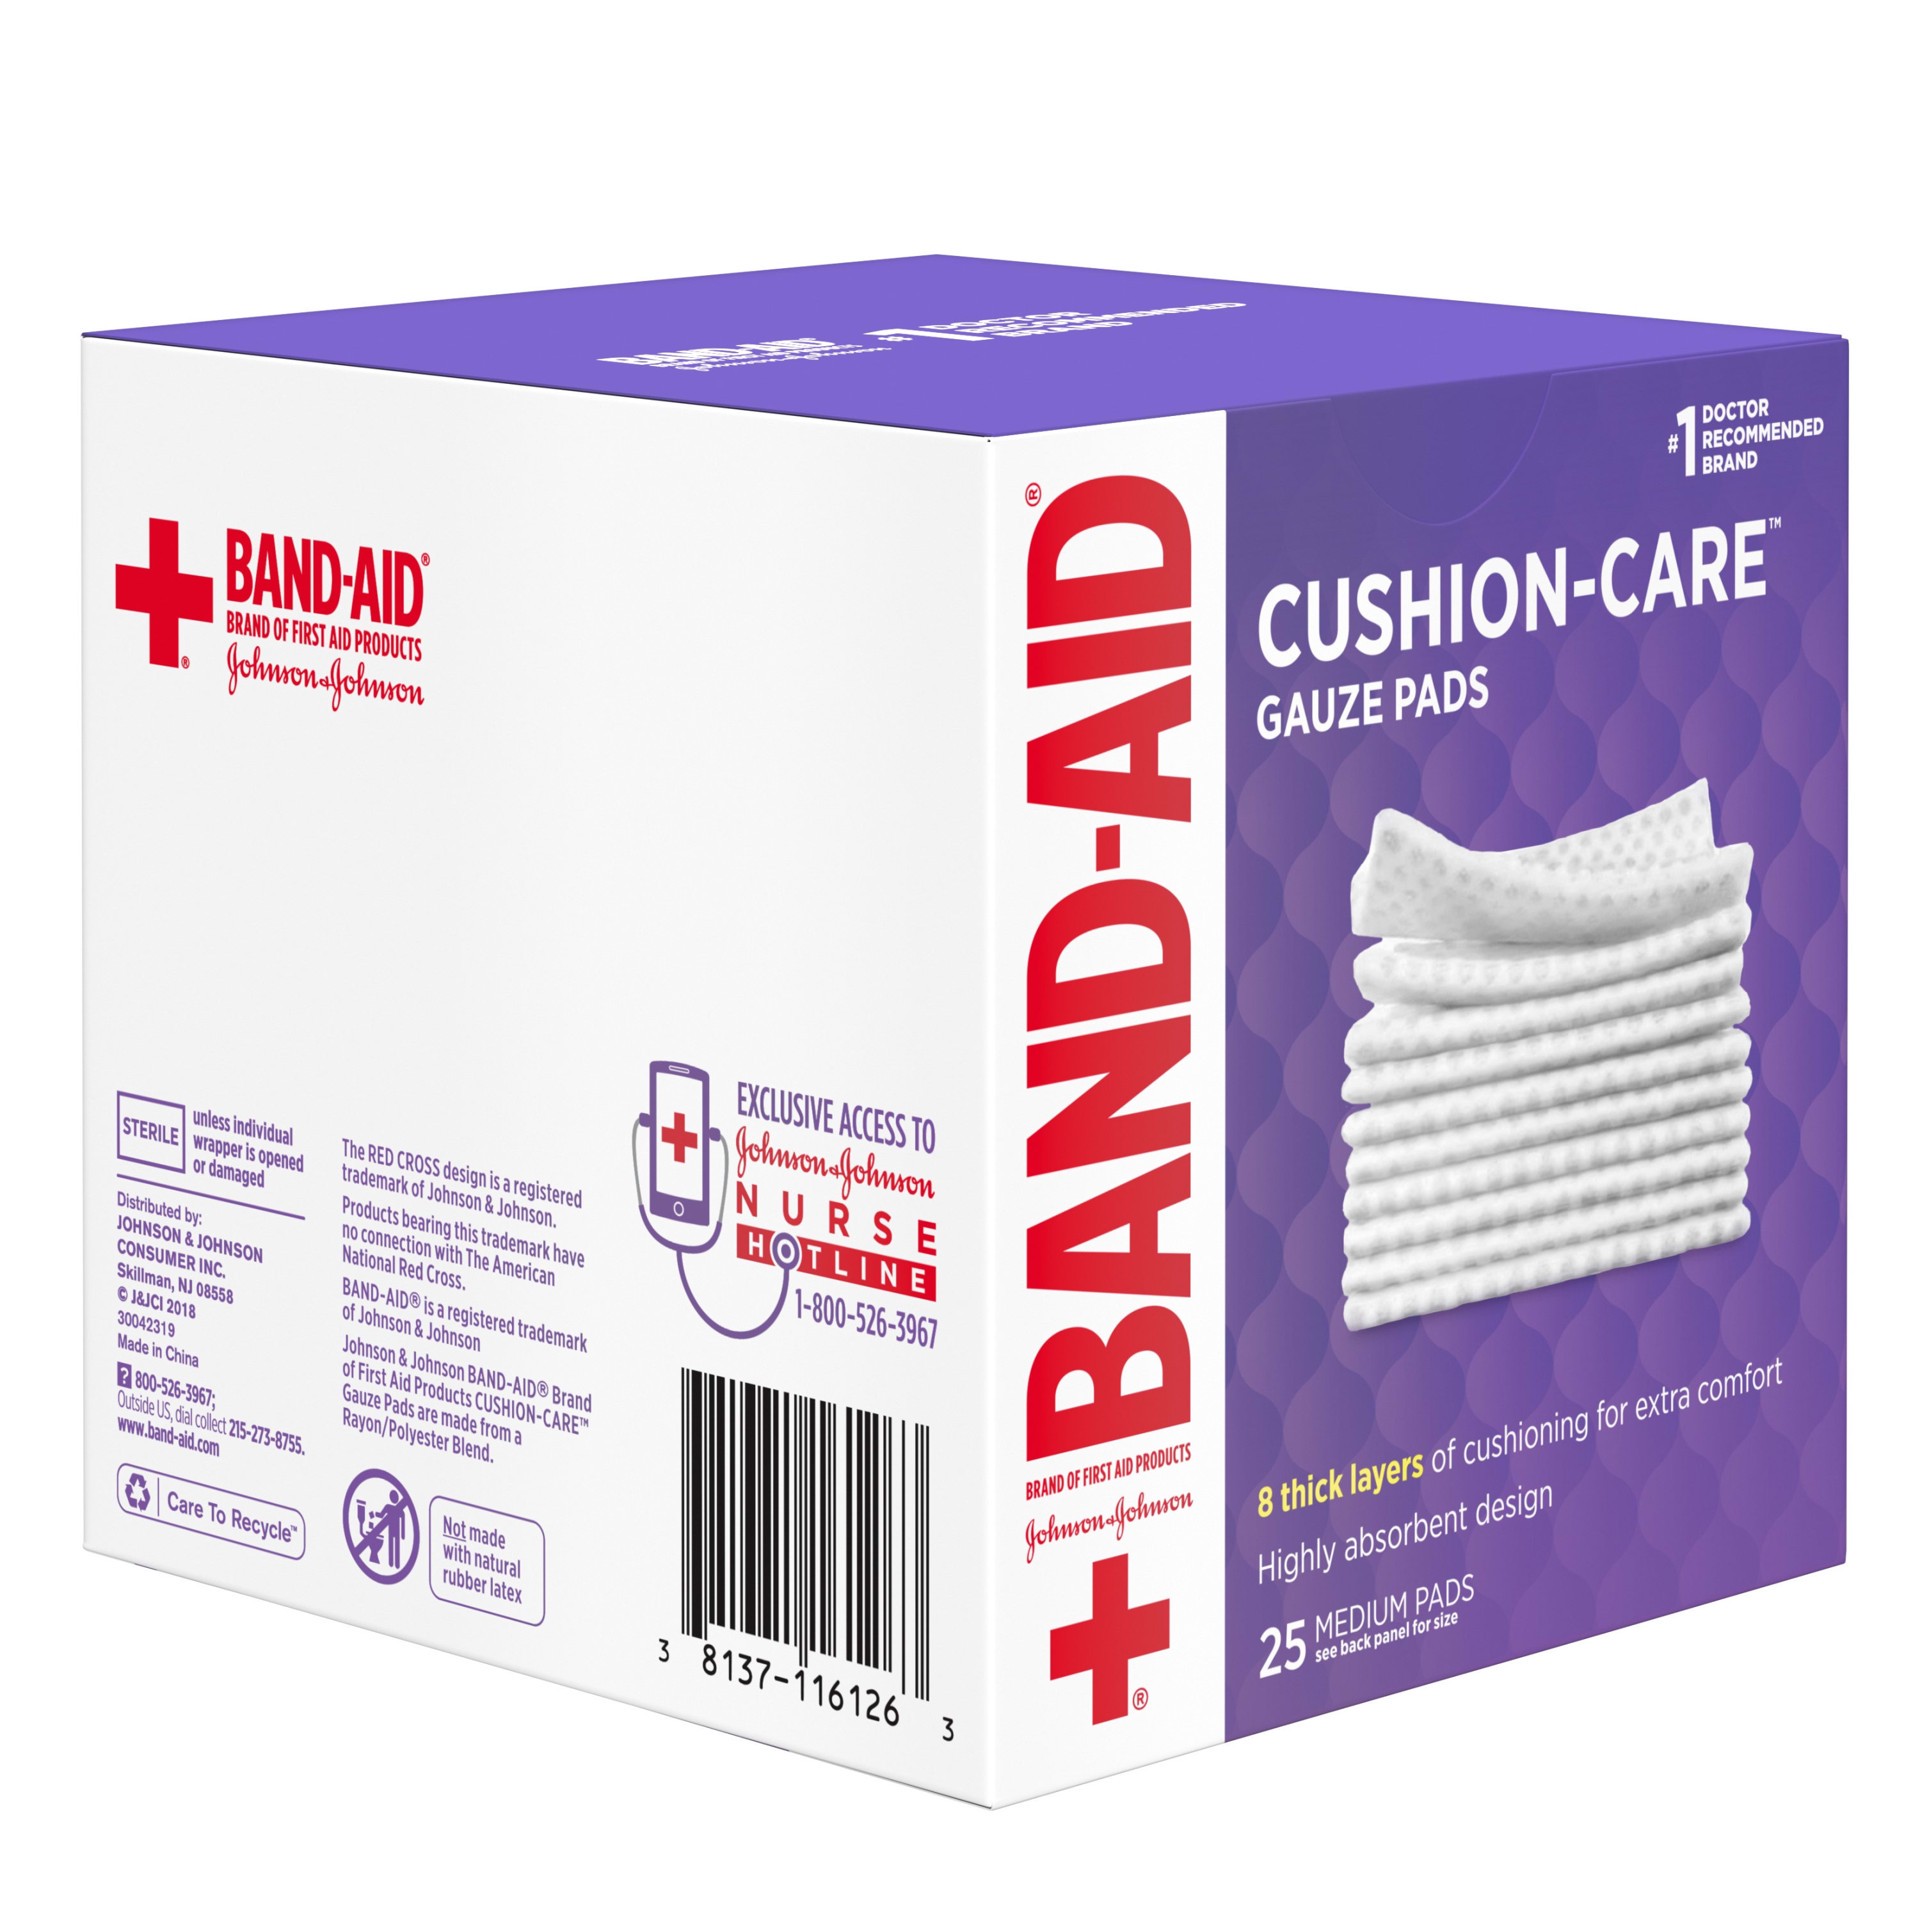 slide 3 of 5, BAND-AID Cushion Care Sterile Gauze Pads for Protection of Minor Cut, Scrapes & Burns, Non-Adhesive & Wound Care Dressing Pads, Medium Size, 3 inches x 3 inches, 25 ct, 25 ct